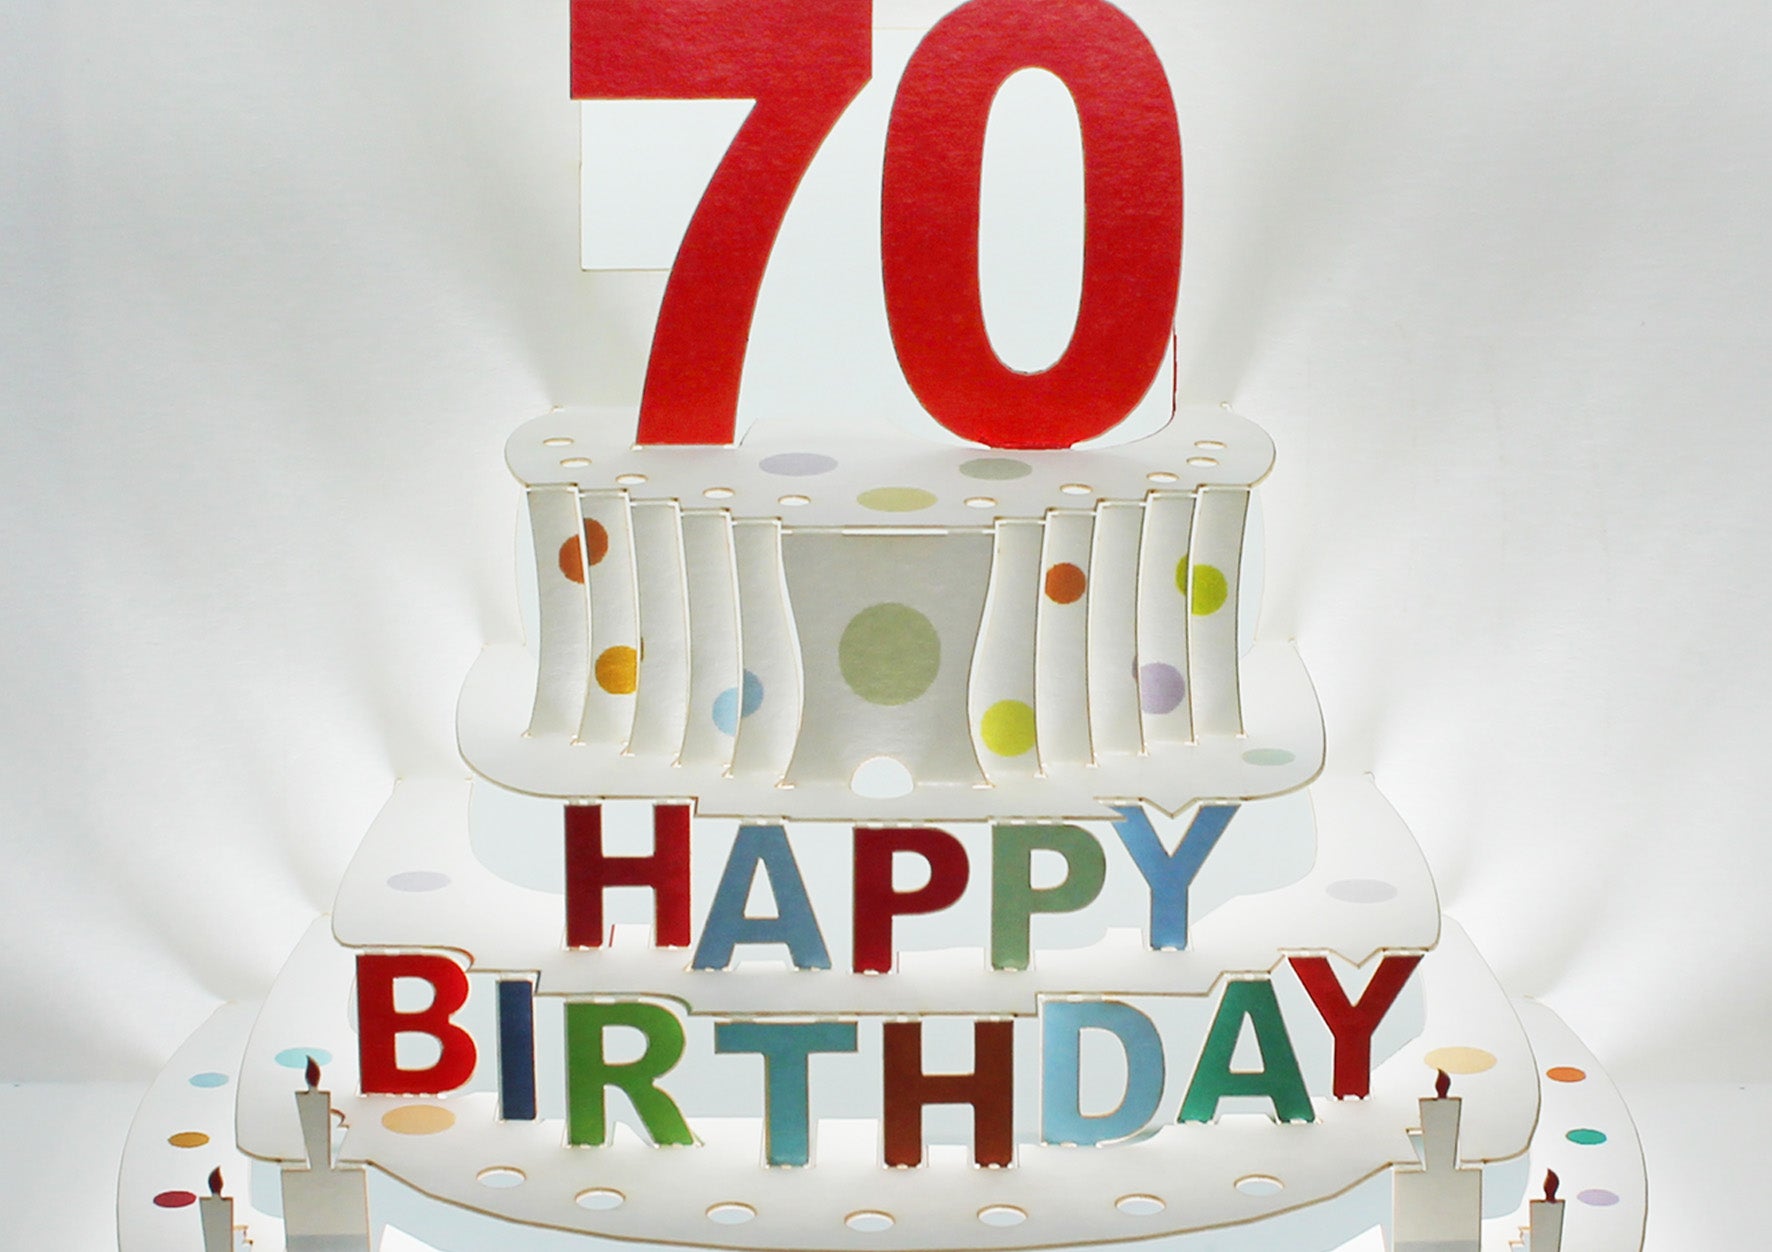 Happy 70th Birthday 3D Pop Up Greetings Card